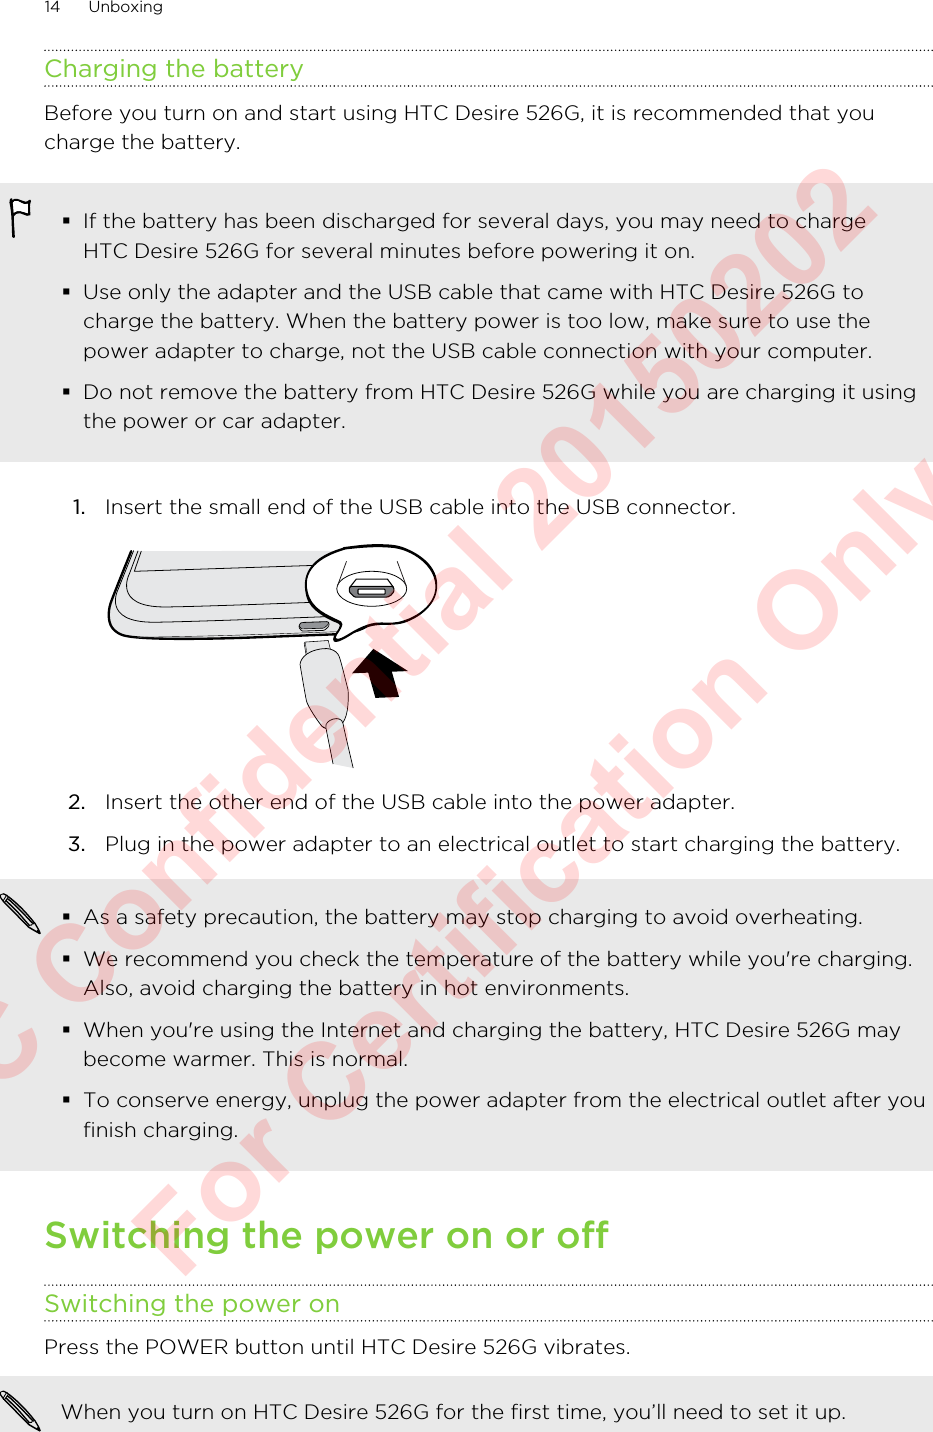 Charging the batteryBefore you turn on and start using HTC Desire 526G, it is recommended that youcharge the battery.§If the battery has been discharged for several days, you may need to chargeHTC Desire 526G for several minutes before powering it on.§Use only the adapter and the USB cable that came with HTC Desire 526G tocharge the battery. When the battery power is too low, make sure to use thepower adapter to charge, not the USB cable connection with your computer.§Do not remove the battery from HTC Desire 526G while you are charging it usingthe power or car adapter.1. Insert the small end of the USB cable into the USB connector. 2. Insert the other end of the USB cable into the power adapter.3. Plug in the power adapter to an electrical outlet to start charging the battery.§As a safety precaution, the battery may stop charging to avoid overheating.§We recommend you check the temperature of the battery while you&apos;re charging.Also, avoid charging the battery in hot environments.§When you&apos;re using the Internet and charging the battery, HTC Desire 526G maybecome warmer. This is normal.§To conserve energy, unplug the power adapter from the electrical outlet after youfinish charging.Switching the power on or offSwitching the power onPress the POWER button until HTC Desire 526G vibrates. When you turn on HTC Desire 526G for the first time, you’ll need to set it up.14 UnboxingHTC Confidential 20150202  For Certification Only